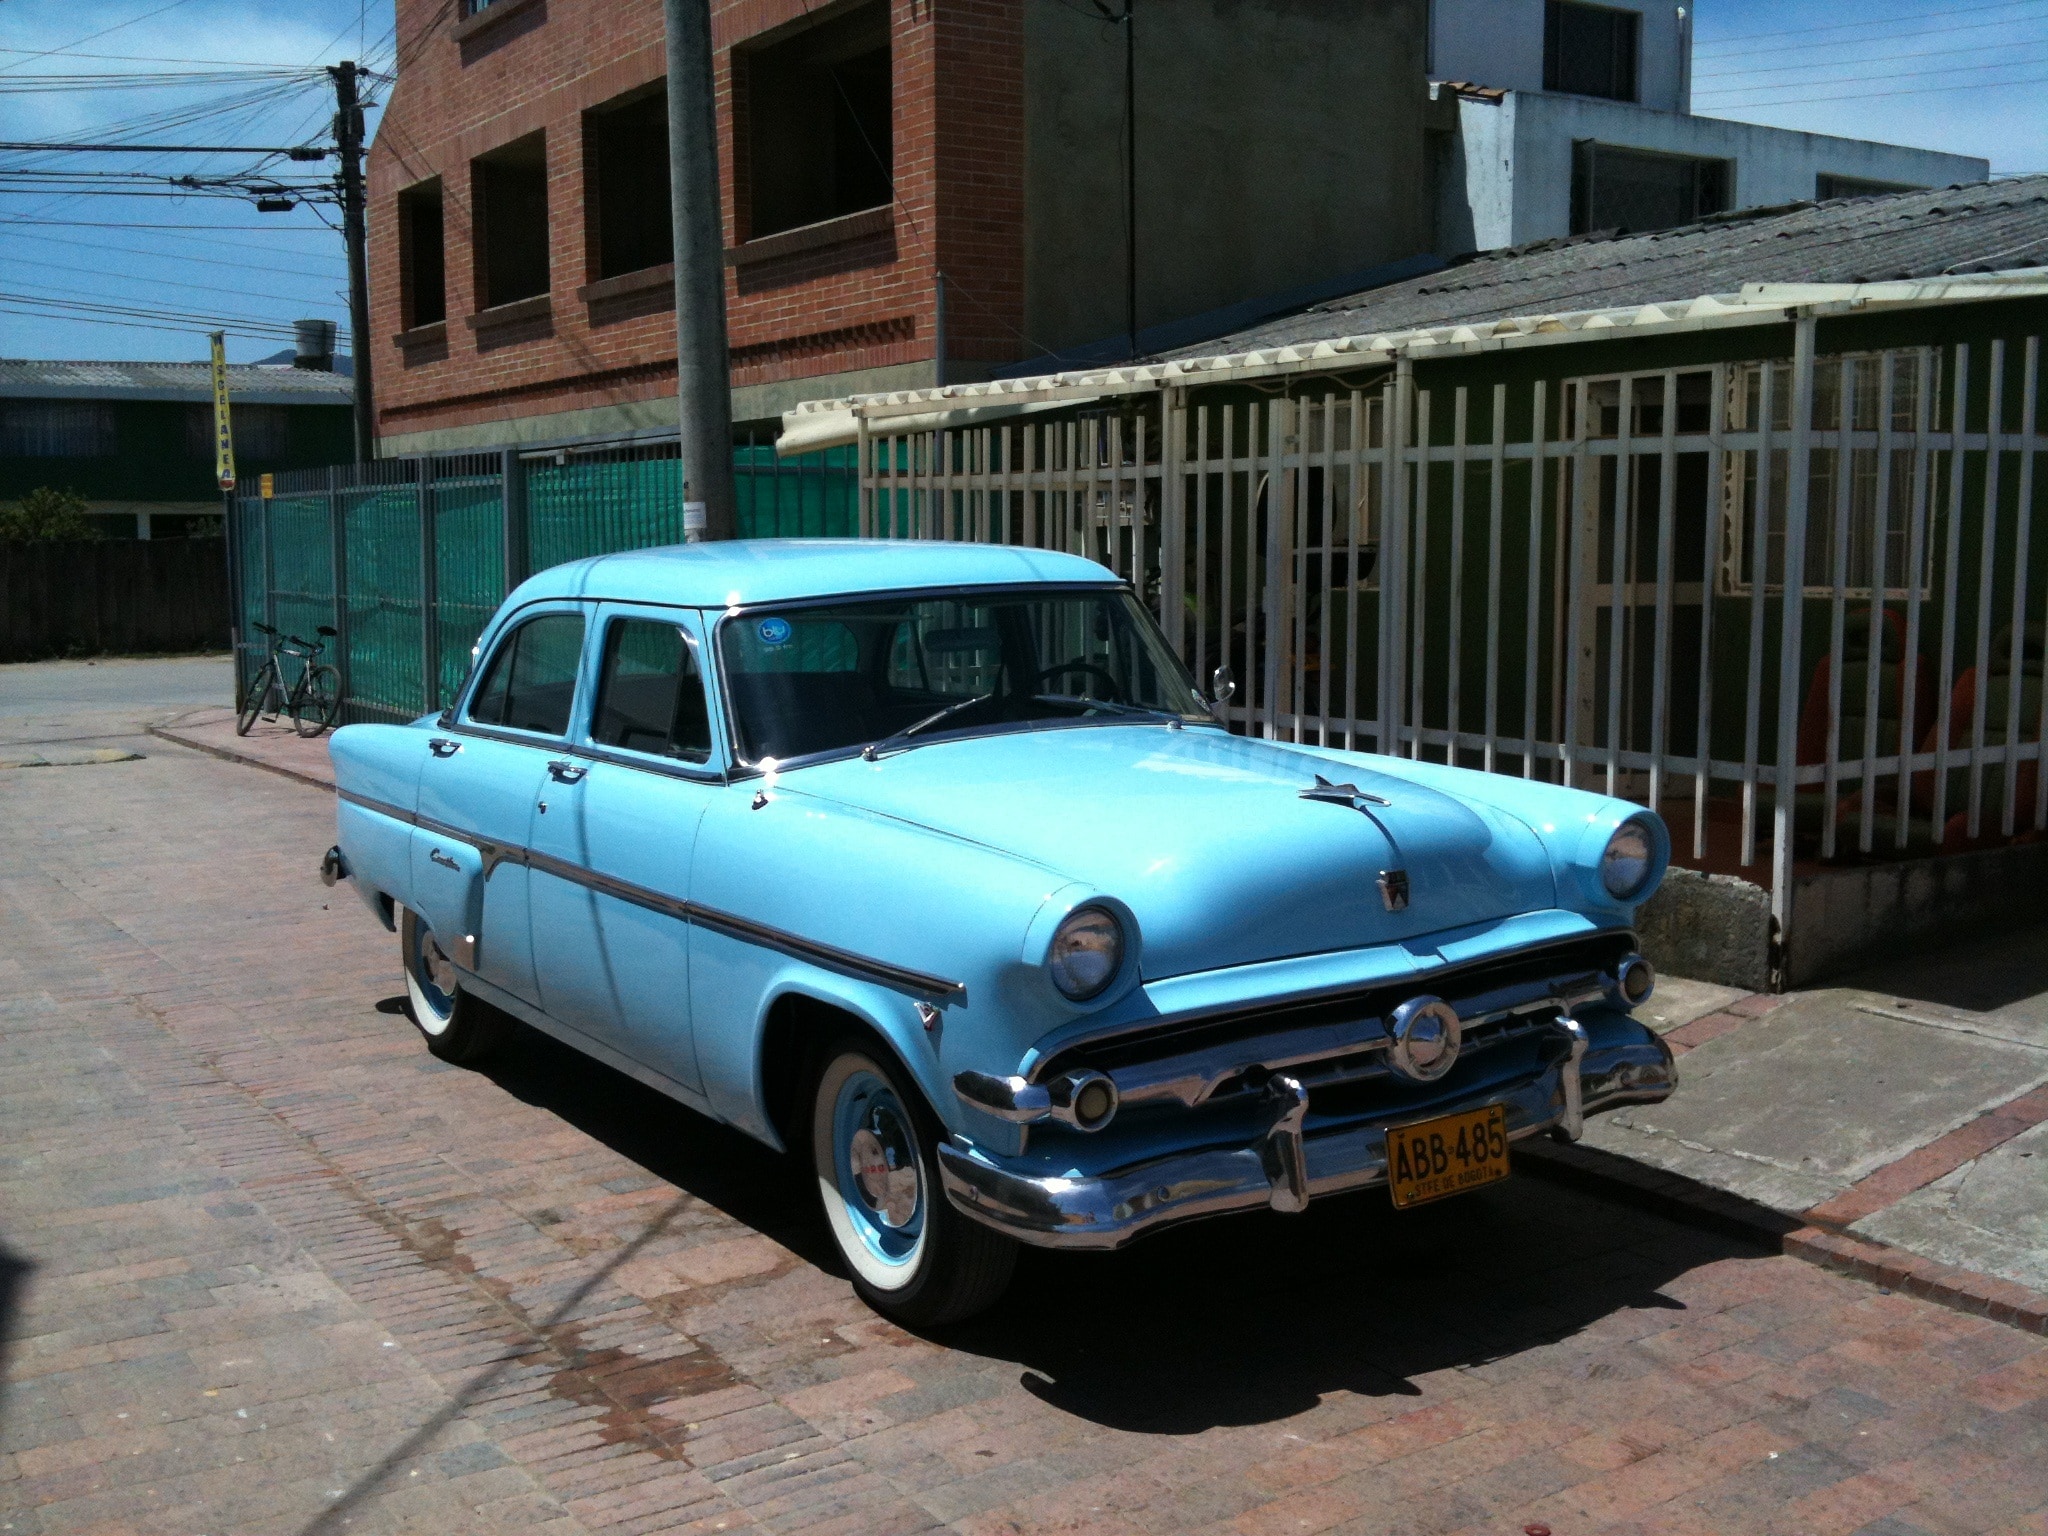 blue classic sedan parked near house during daytime